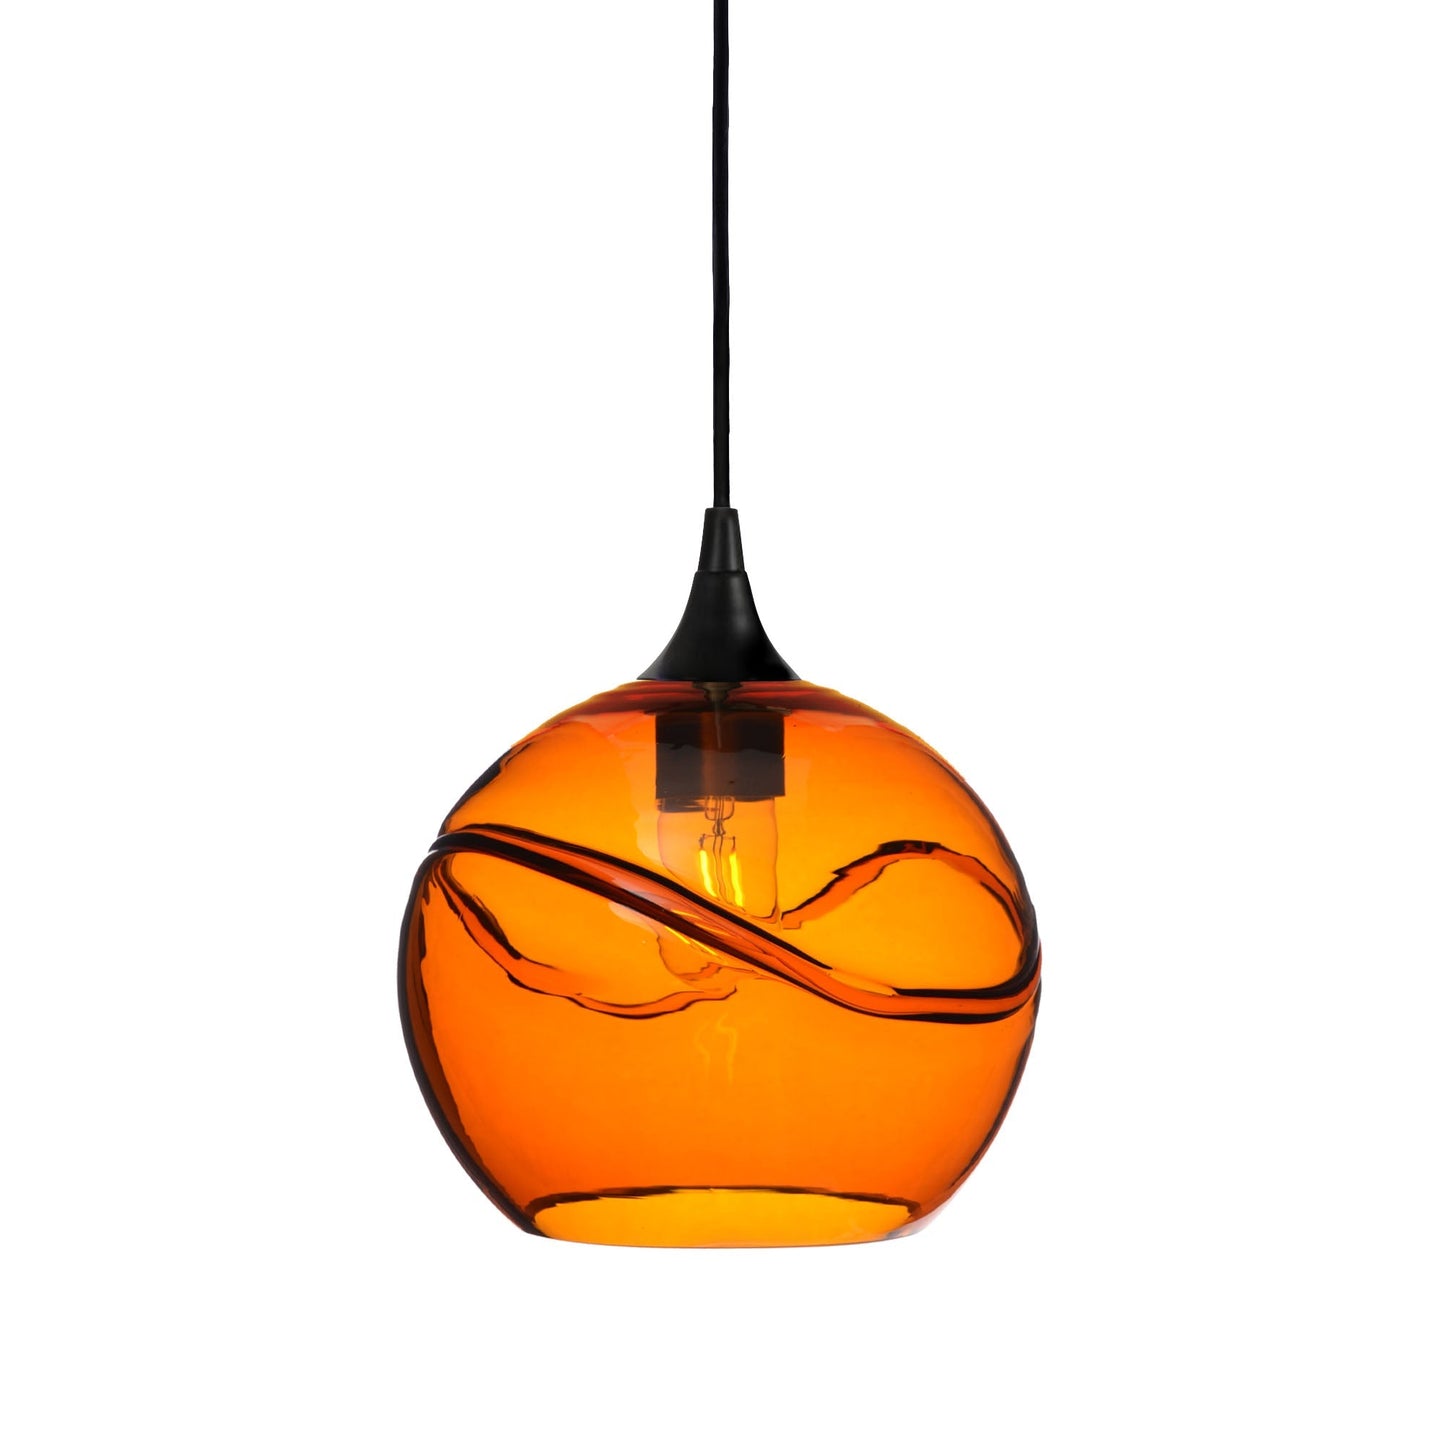 768 Swell: Single Pendant Light-Glass-Bicycle Glass Co - Hotshop-Harvest Gold-Matte Black-Bicycle Glass Co